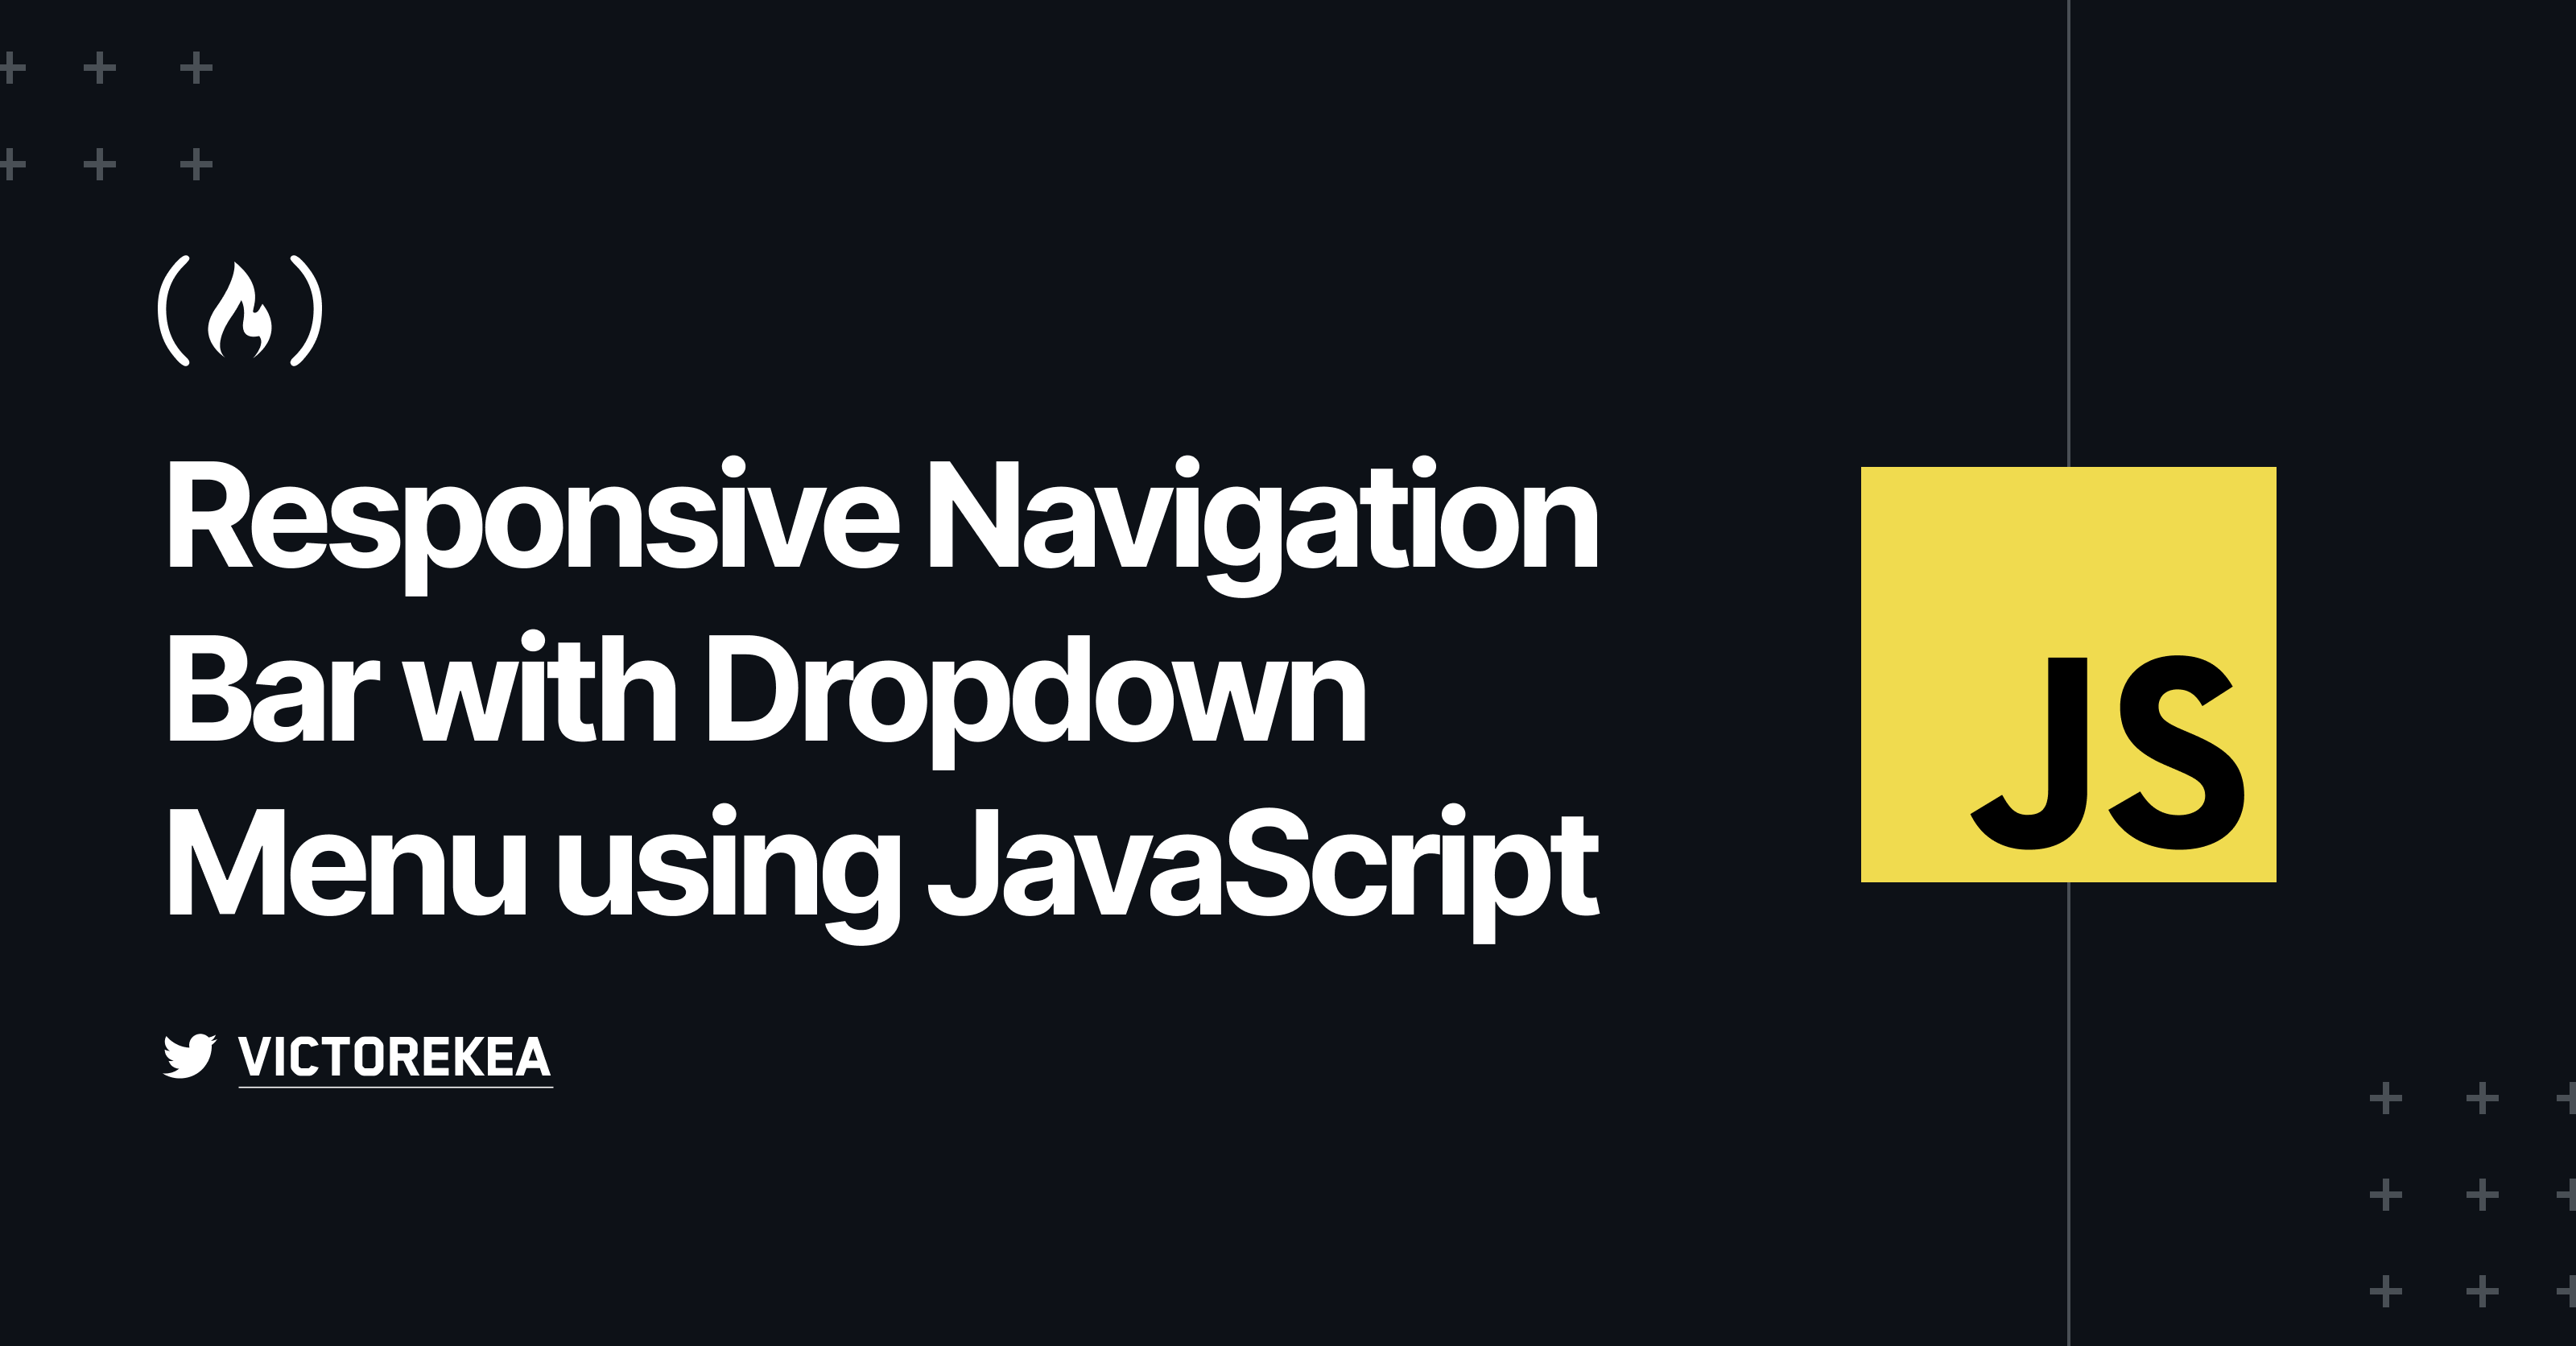 How to Build a Responsive Navigation Bar with a Dropdown Menu using JavaScript